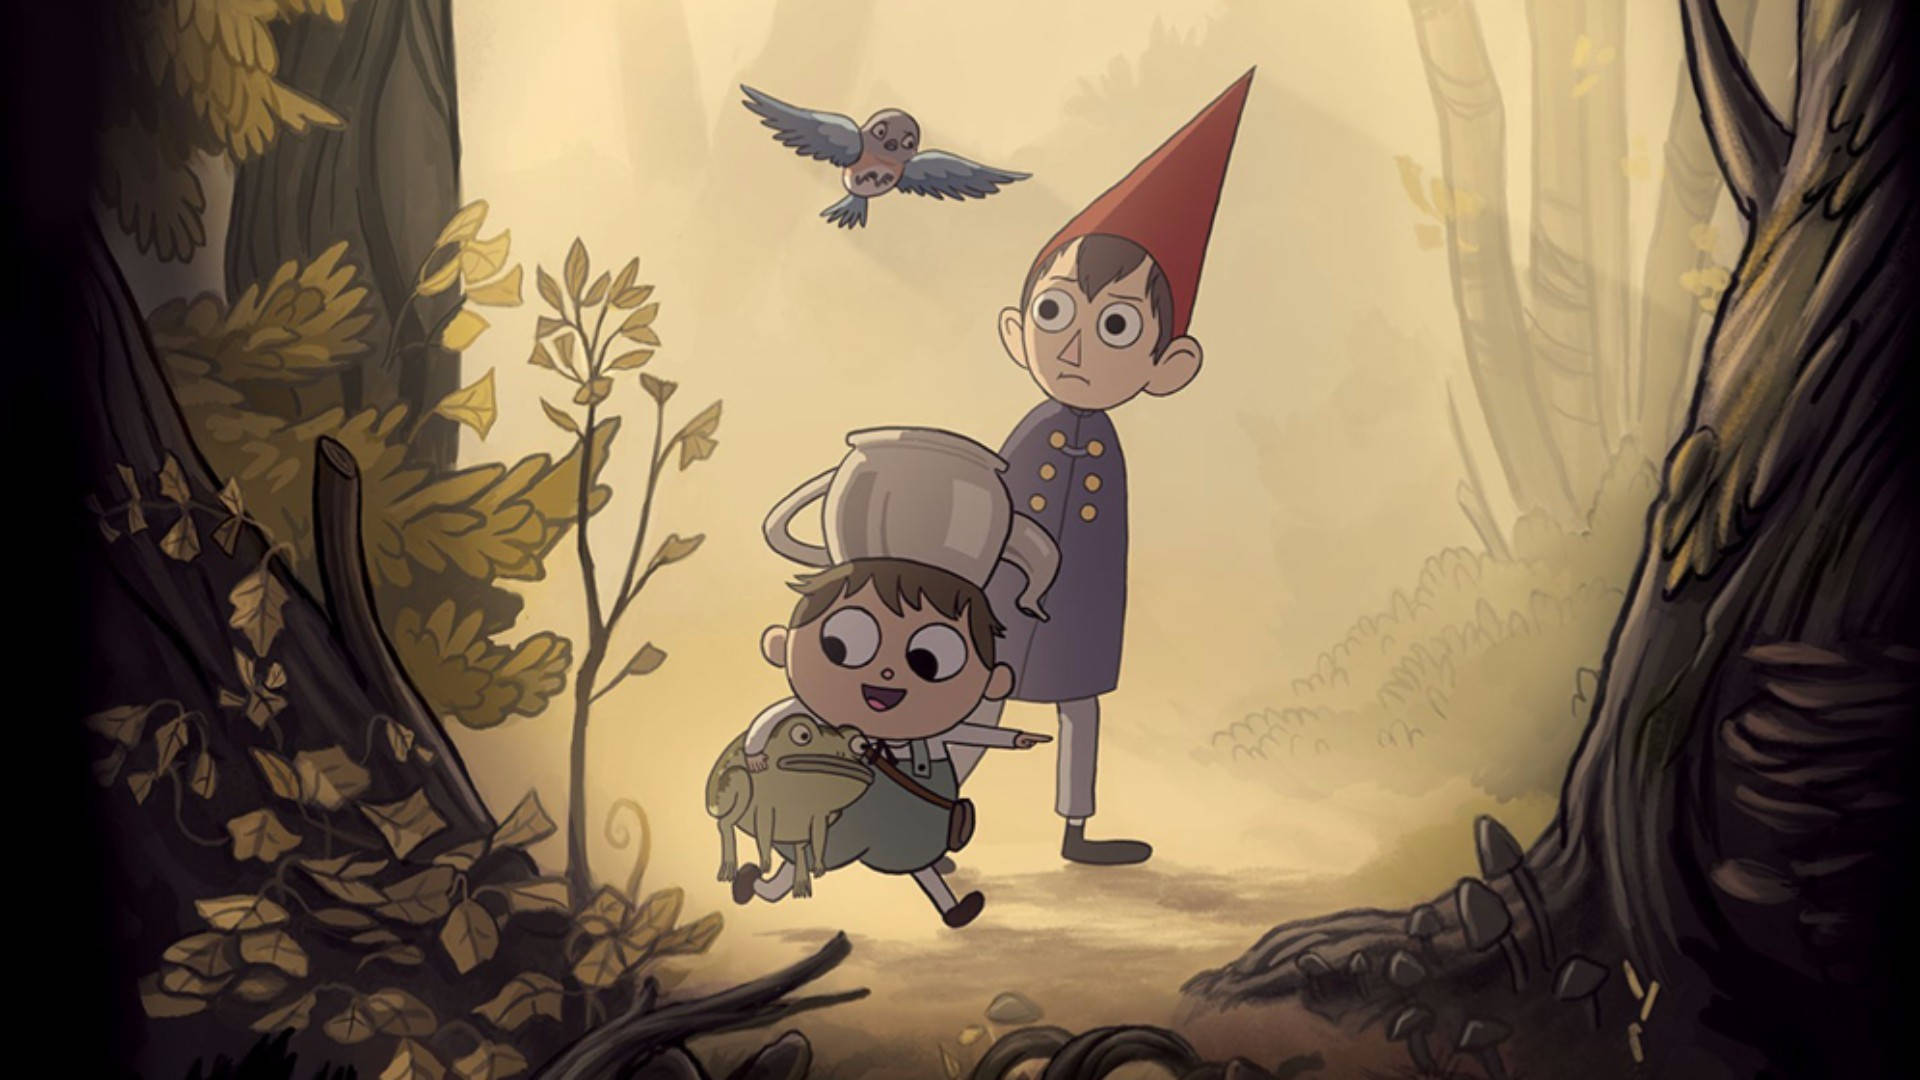 Wirt and Greg with a friendly bird in Over the Garden Wall Wallpaper